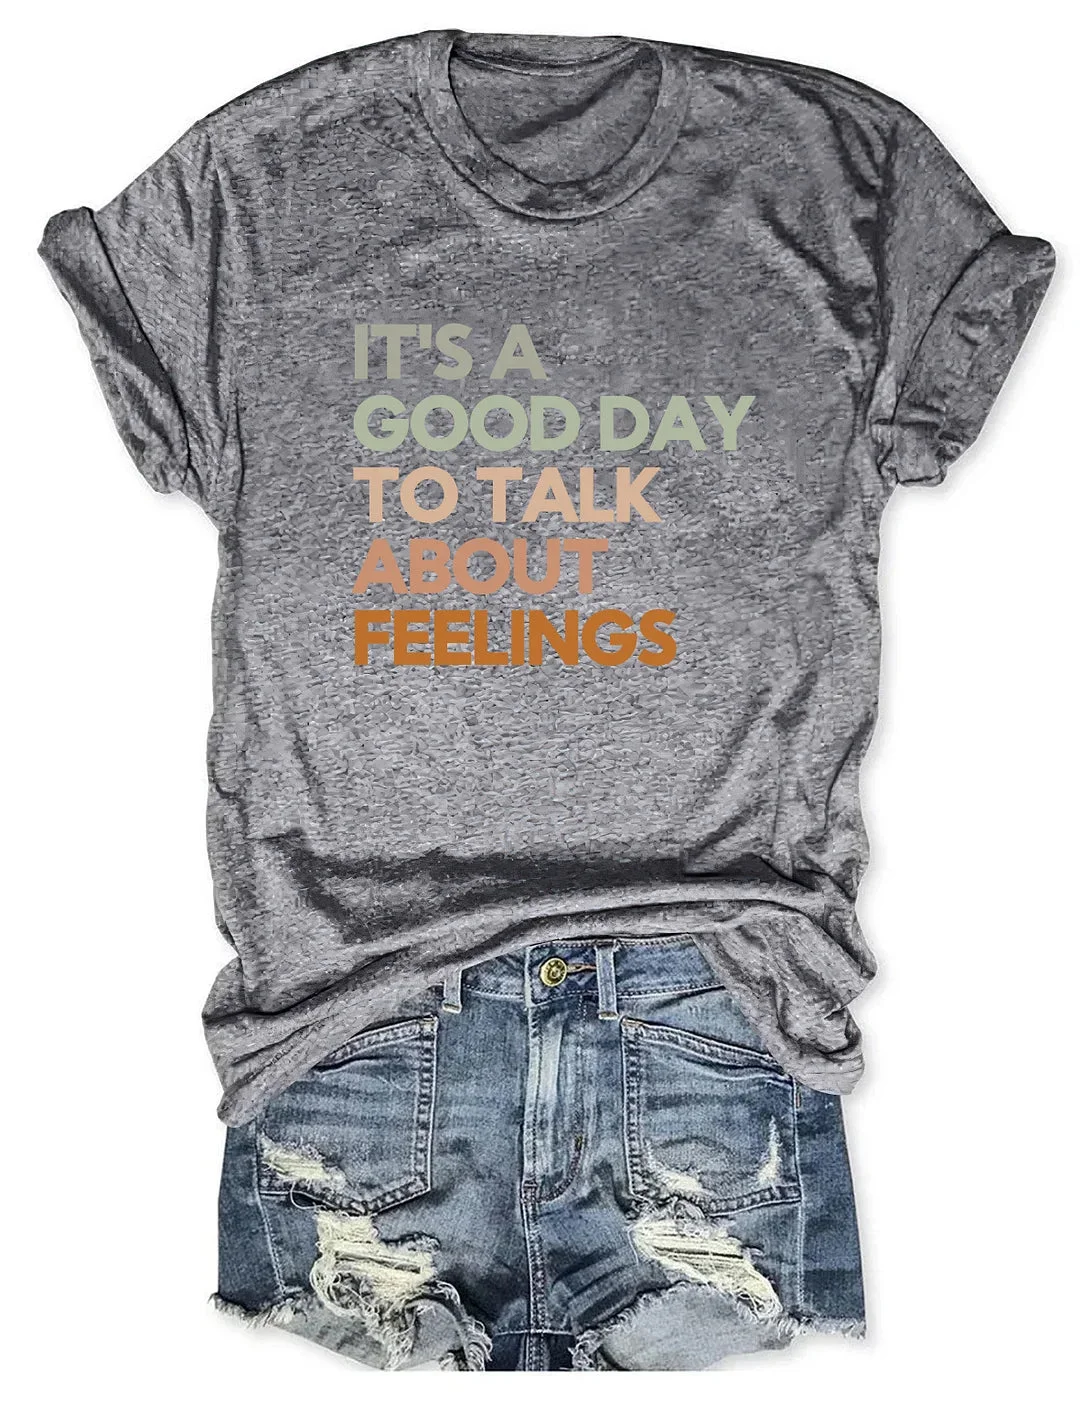 Good Day to Talk About Feelings Printed Round Neck Short Sleeve T-Shirt